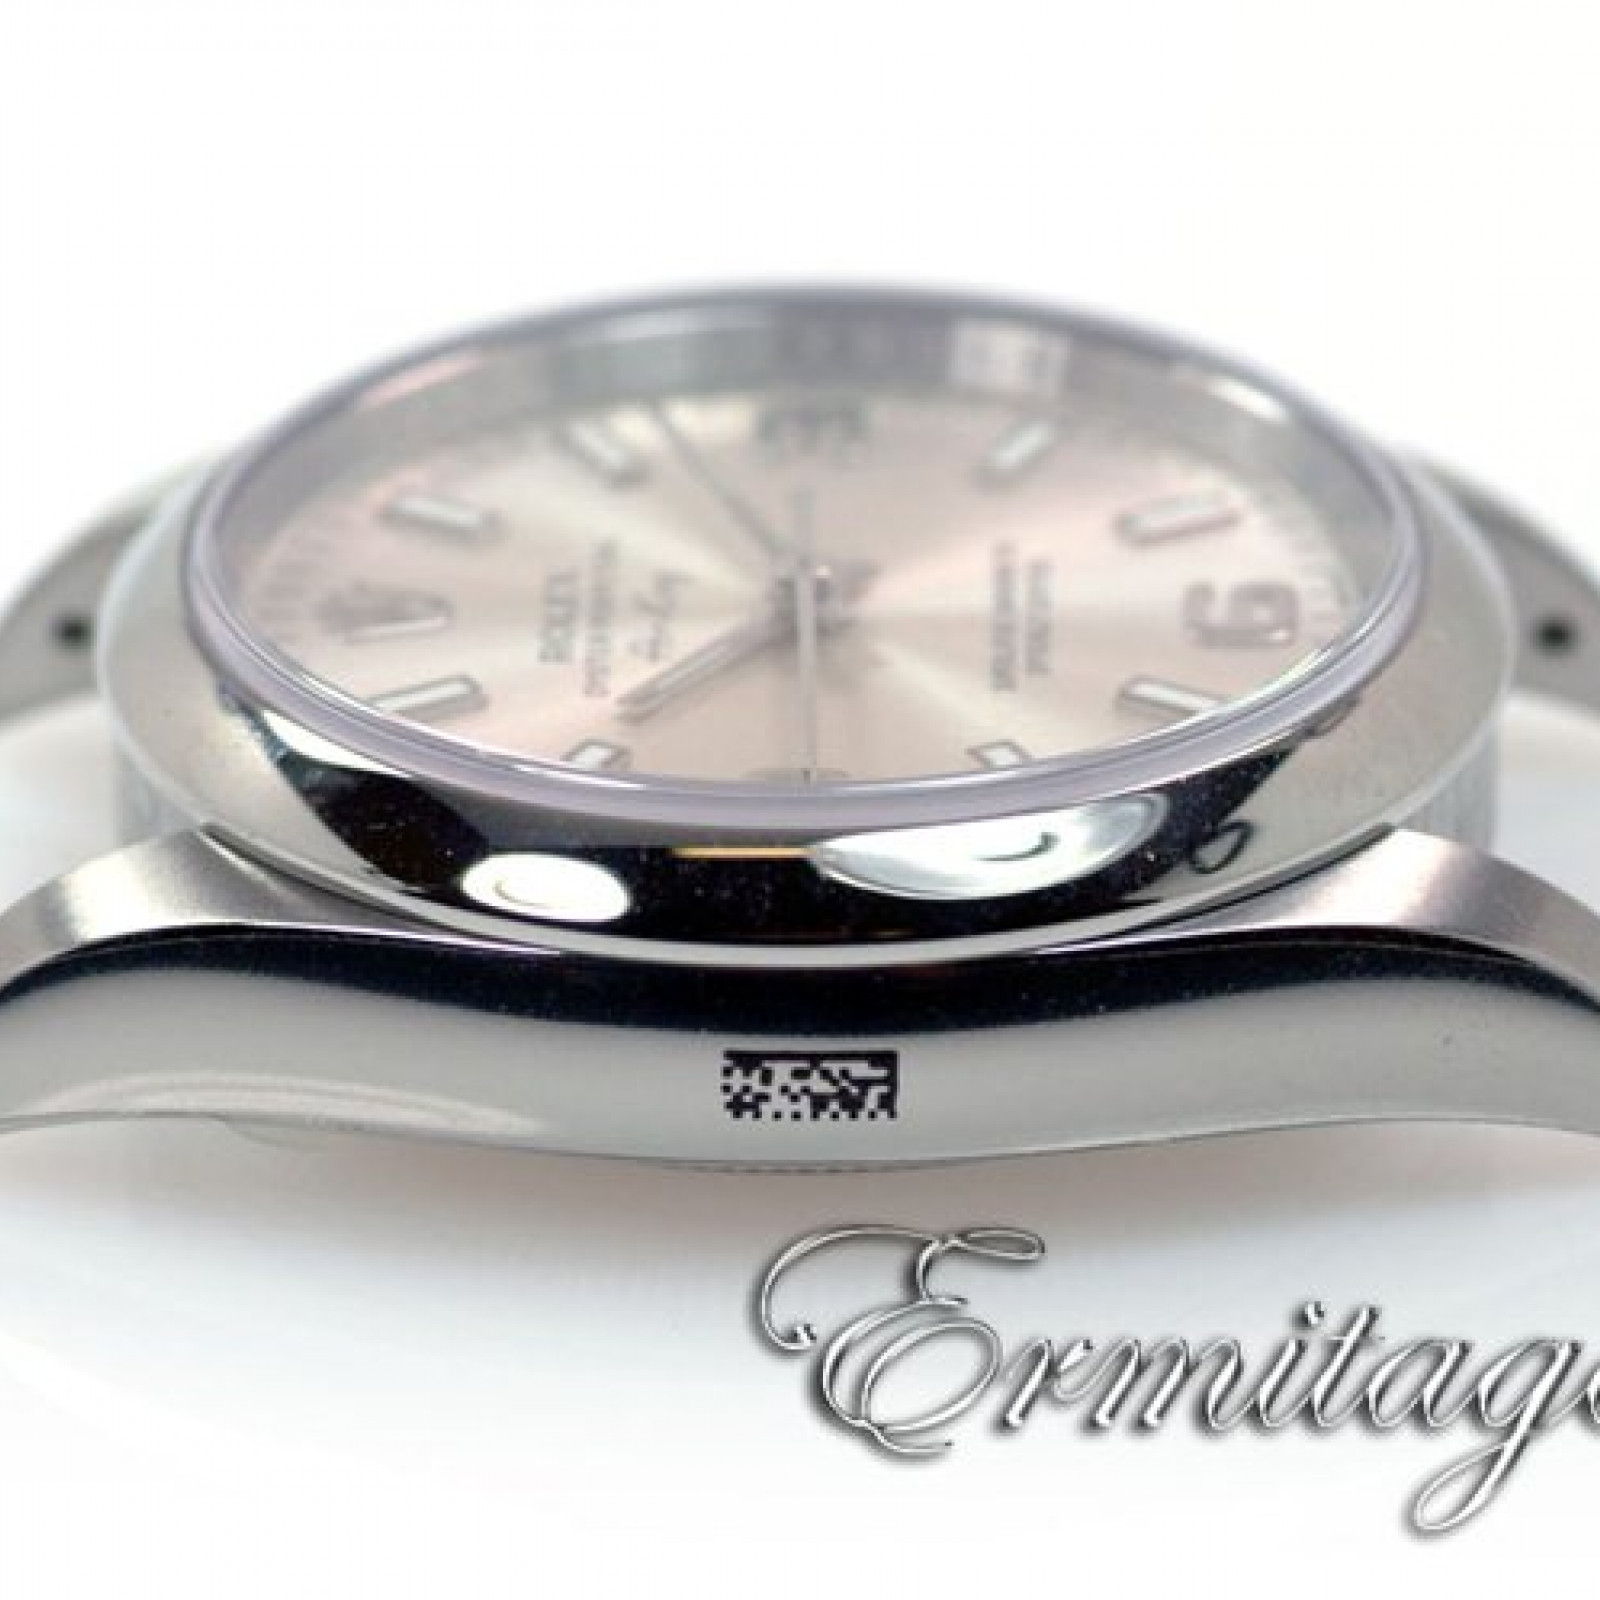 Used Rolex Air King 114200 Silver Dial Year 2011